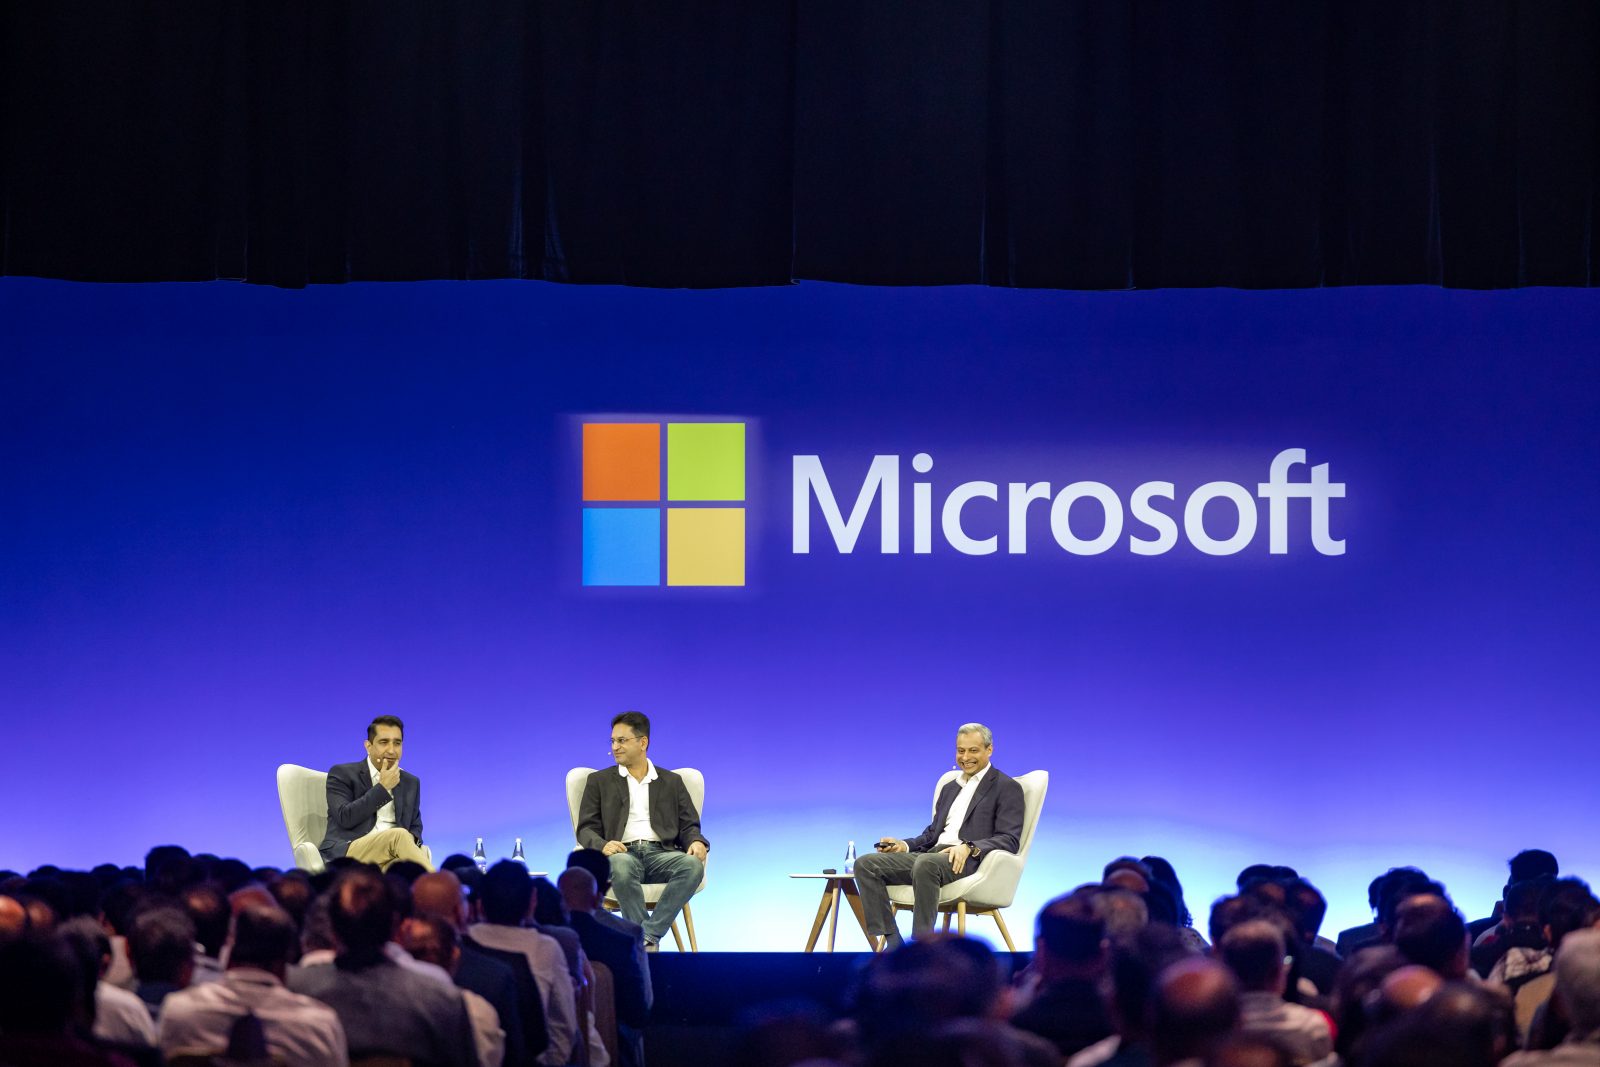 Three men in a panel discussion with Microsoft logo in the backdrop